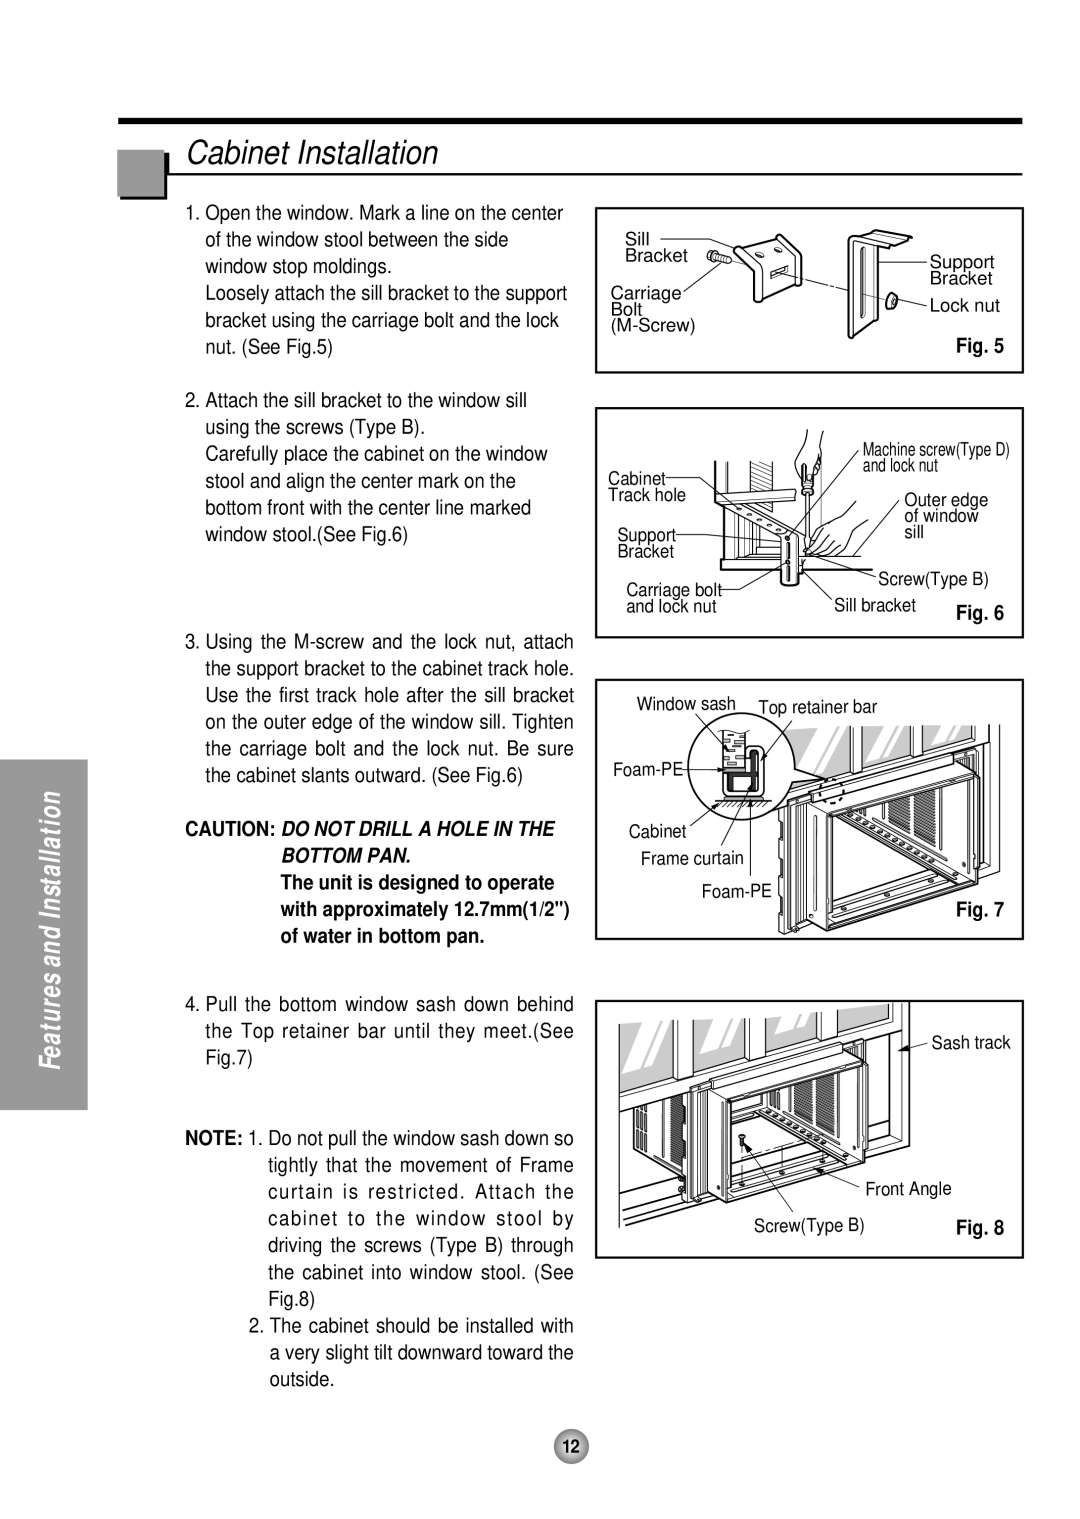 Panasonic CW-XC184HU manual Cabinet Installation, Caution Do Not Drill A Hole In The Bottom Pan, and Installation, Features 